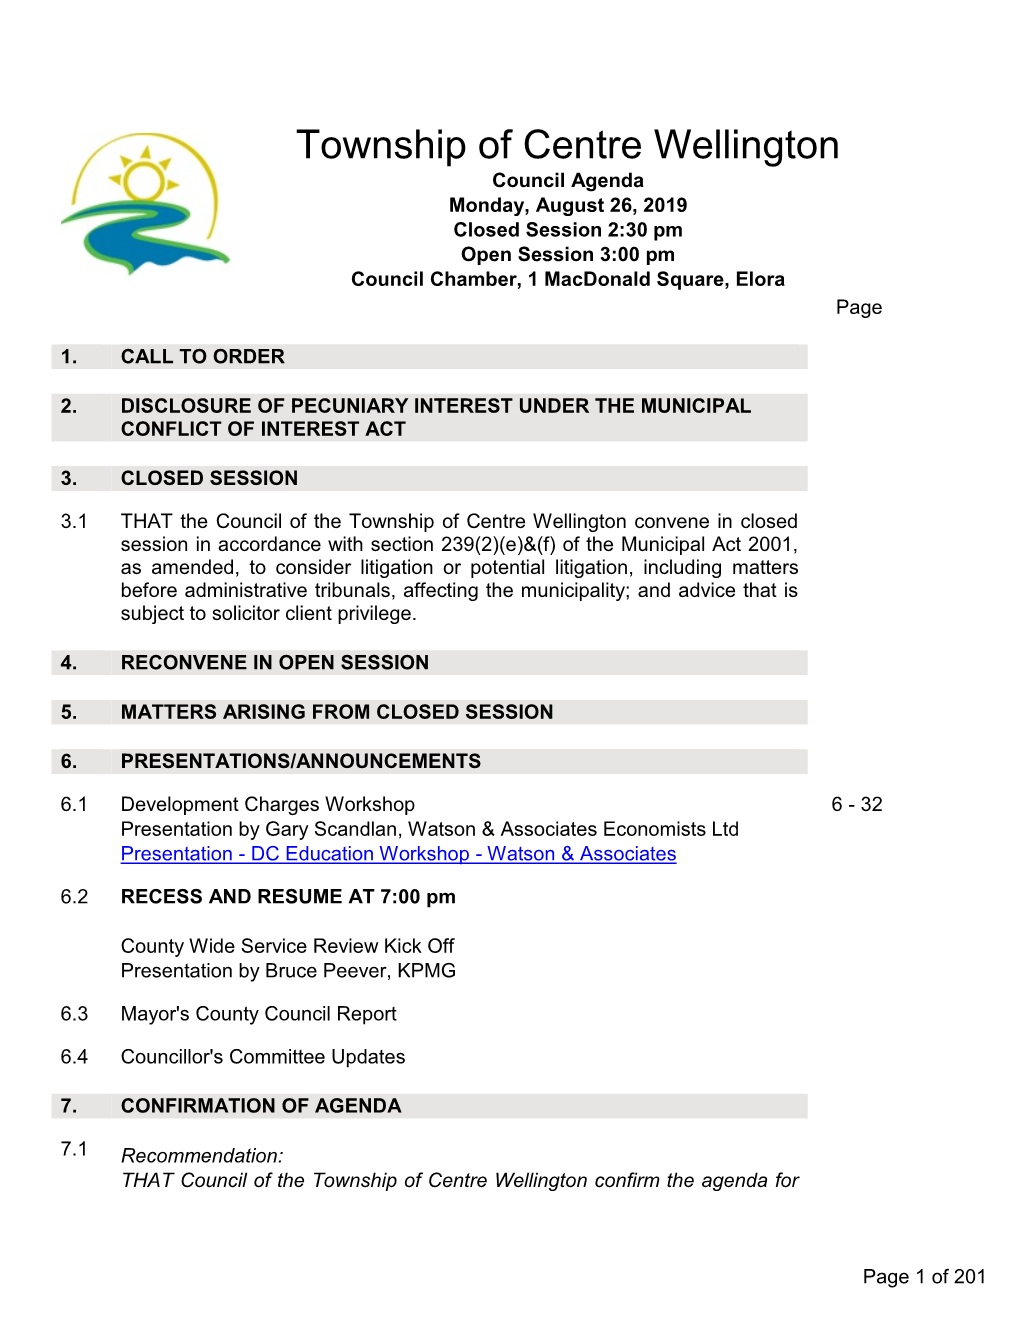 Council Agenda Monday, August 26, 2019 Closed Session 2:30 Pm Open Session 3:00 Pm